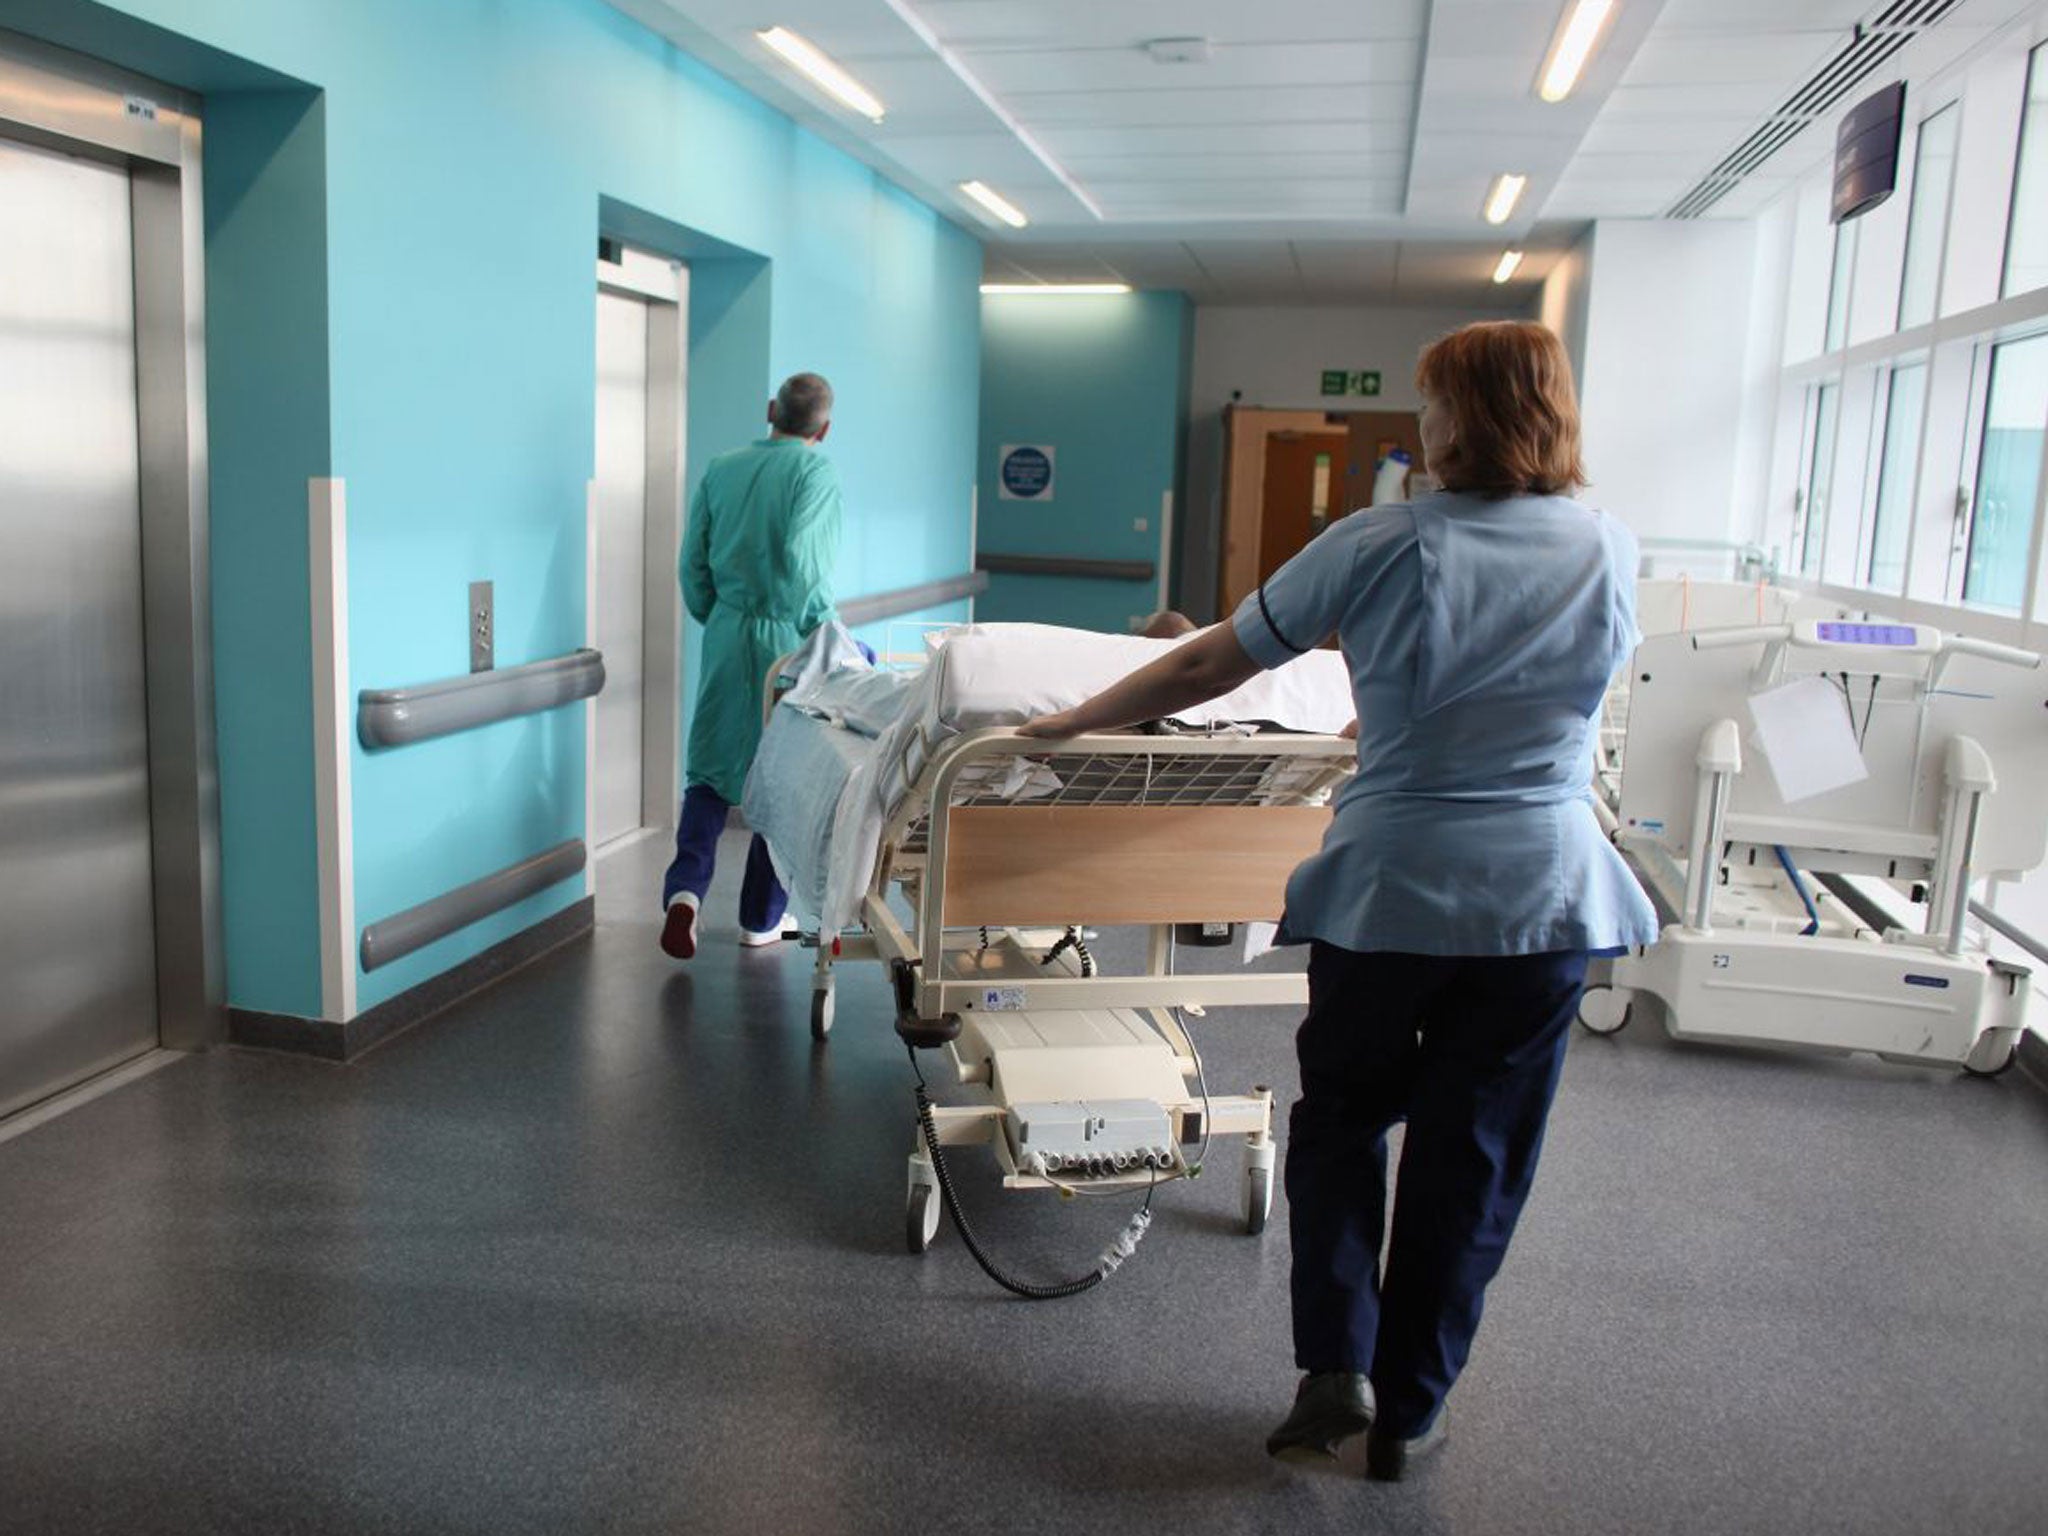 Patients expect to be in safe hands when they go to hospital